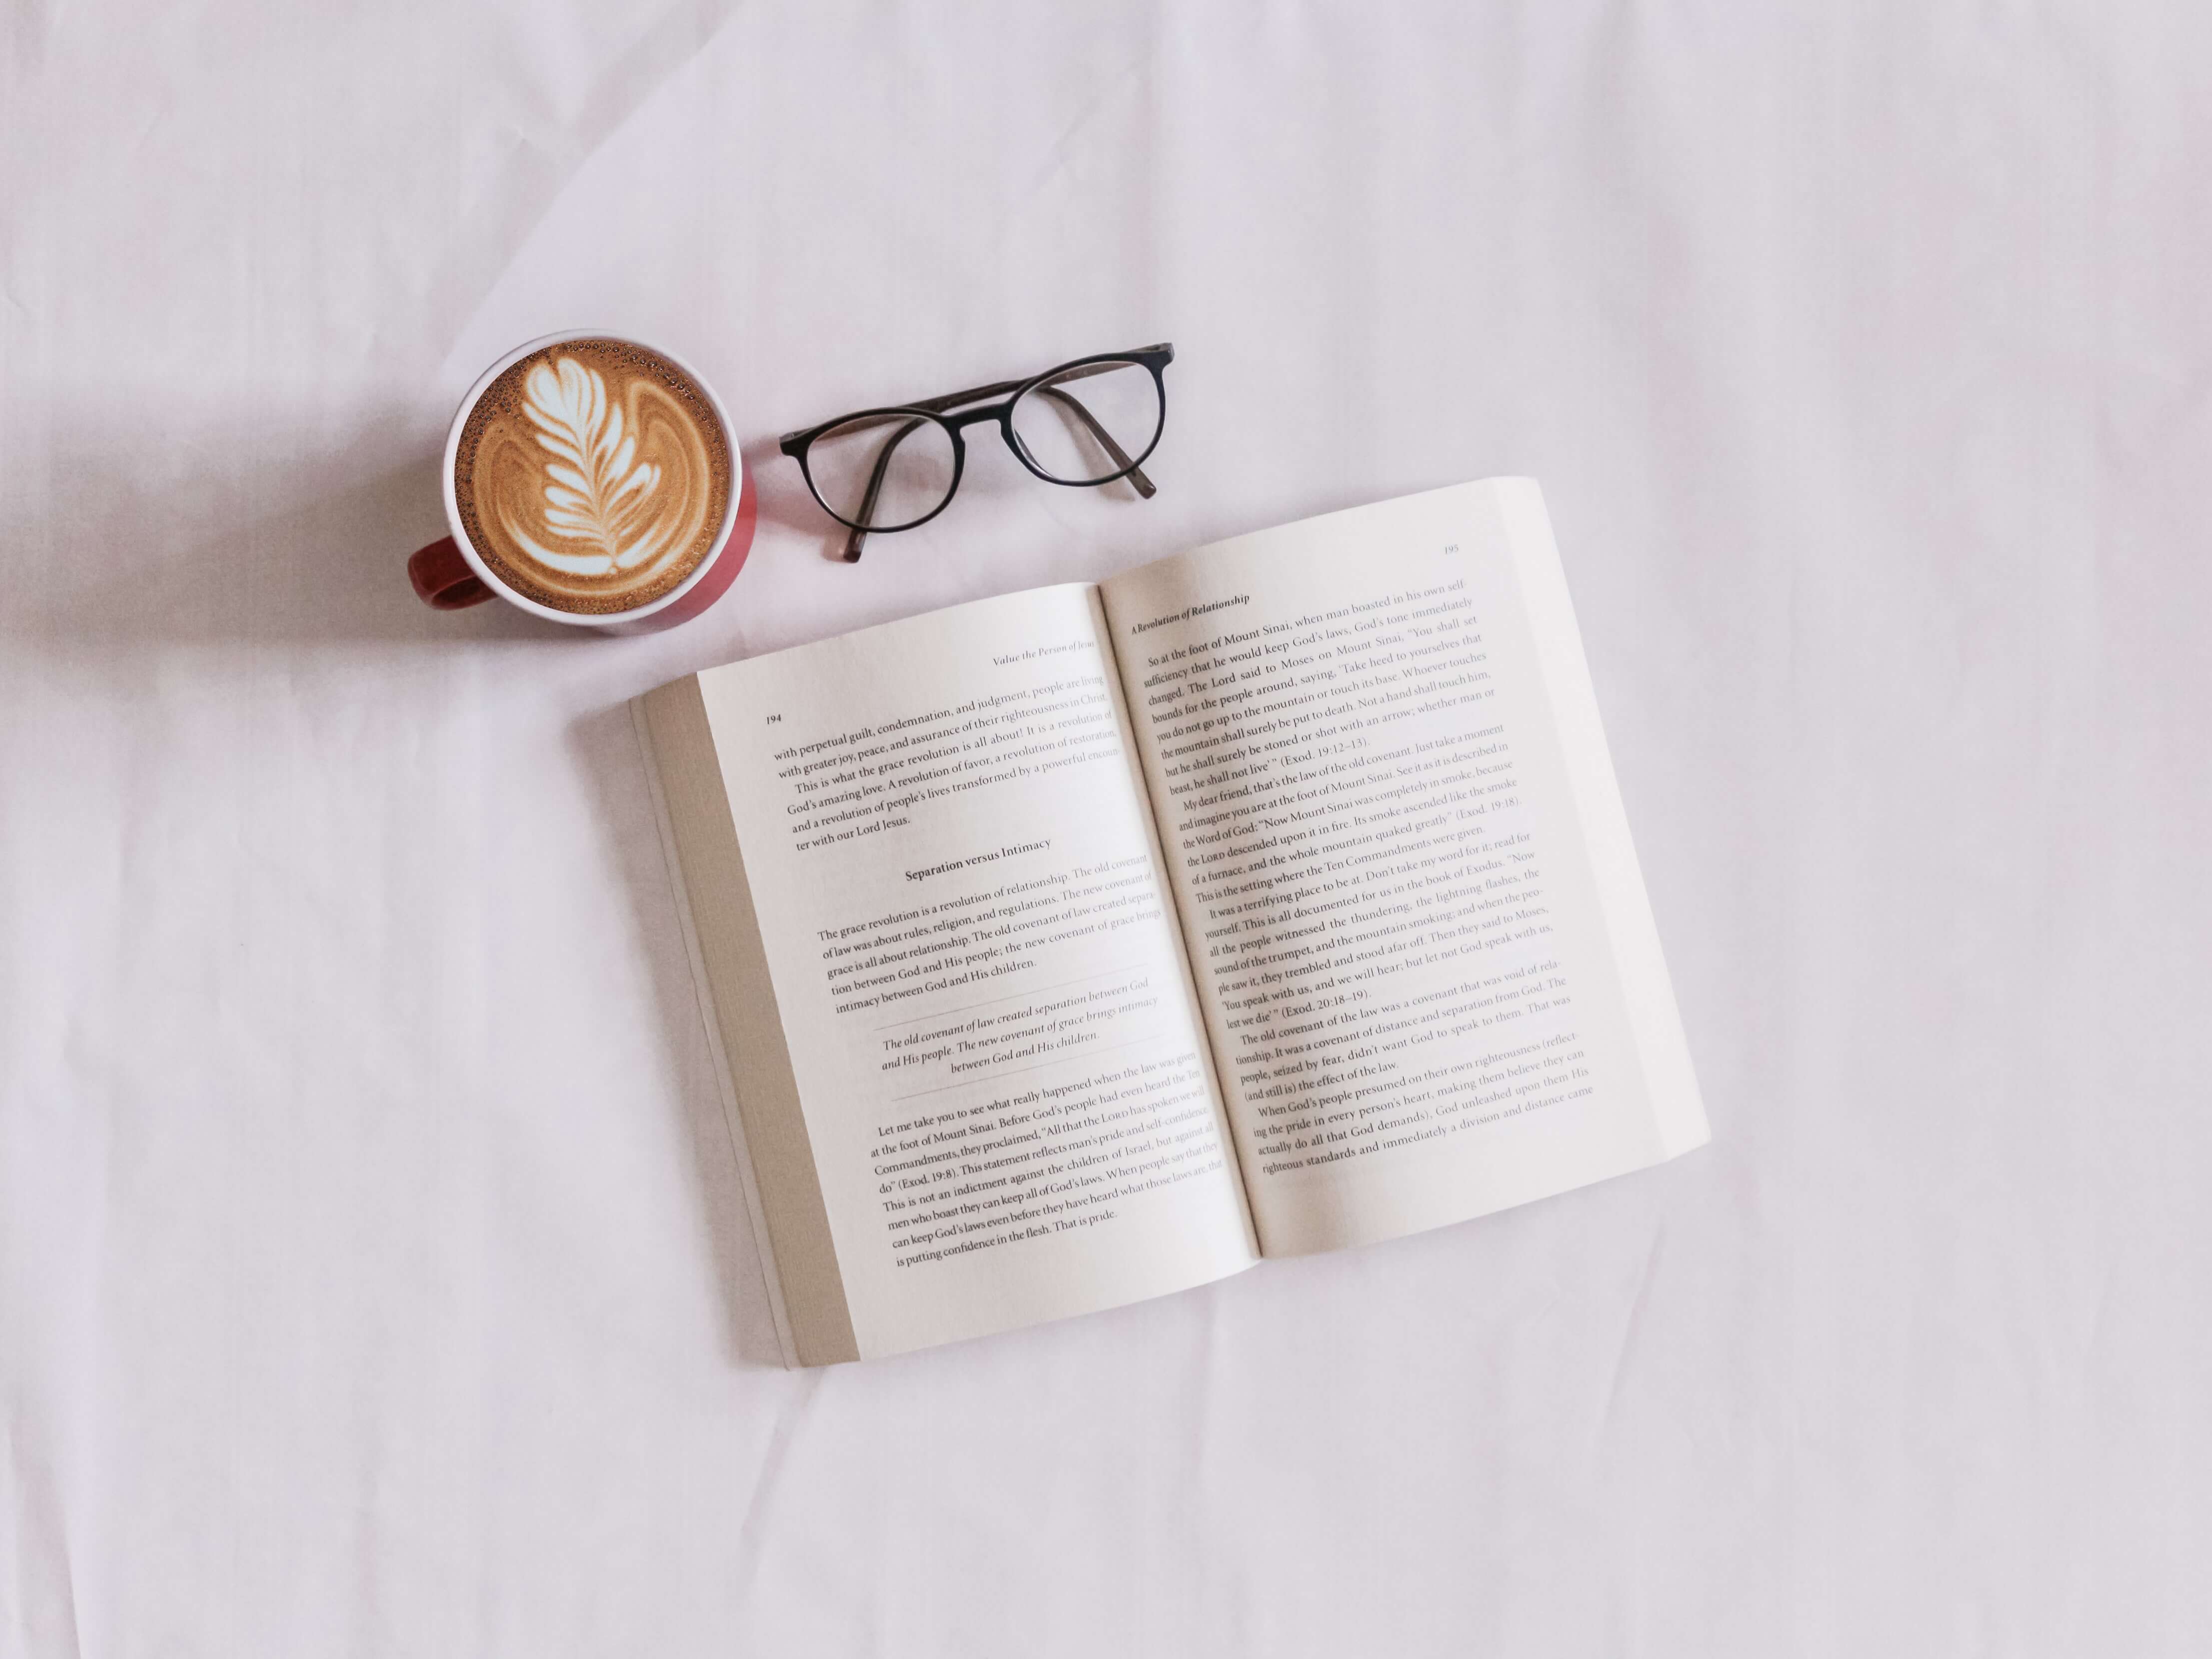 An open book, a pair of glasses, and a latte with a fern drawn on the top with foam on a white background